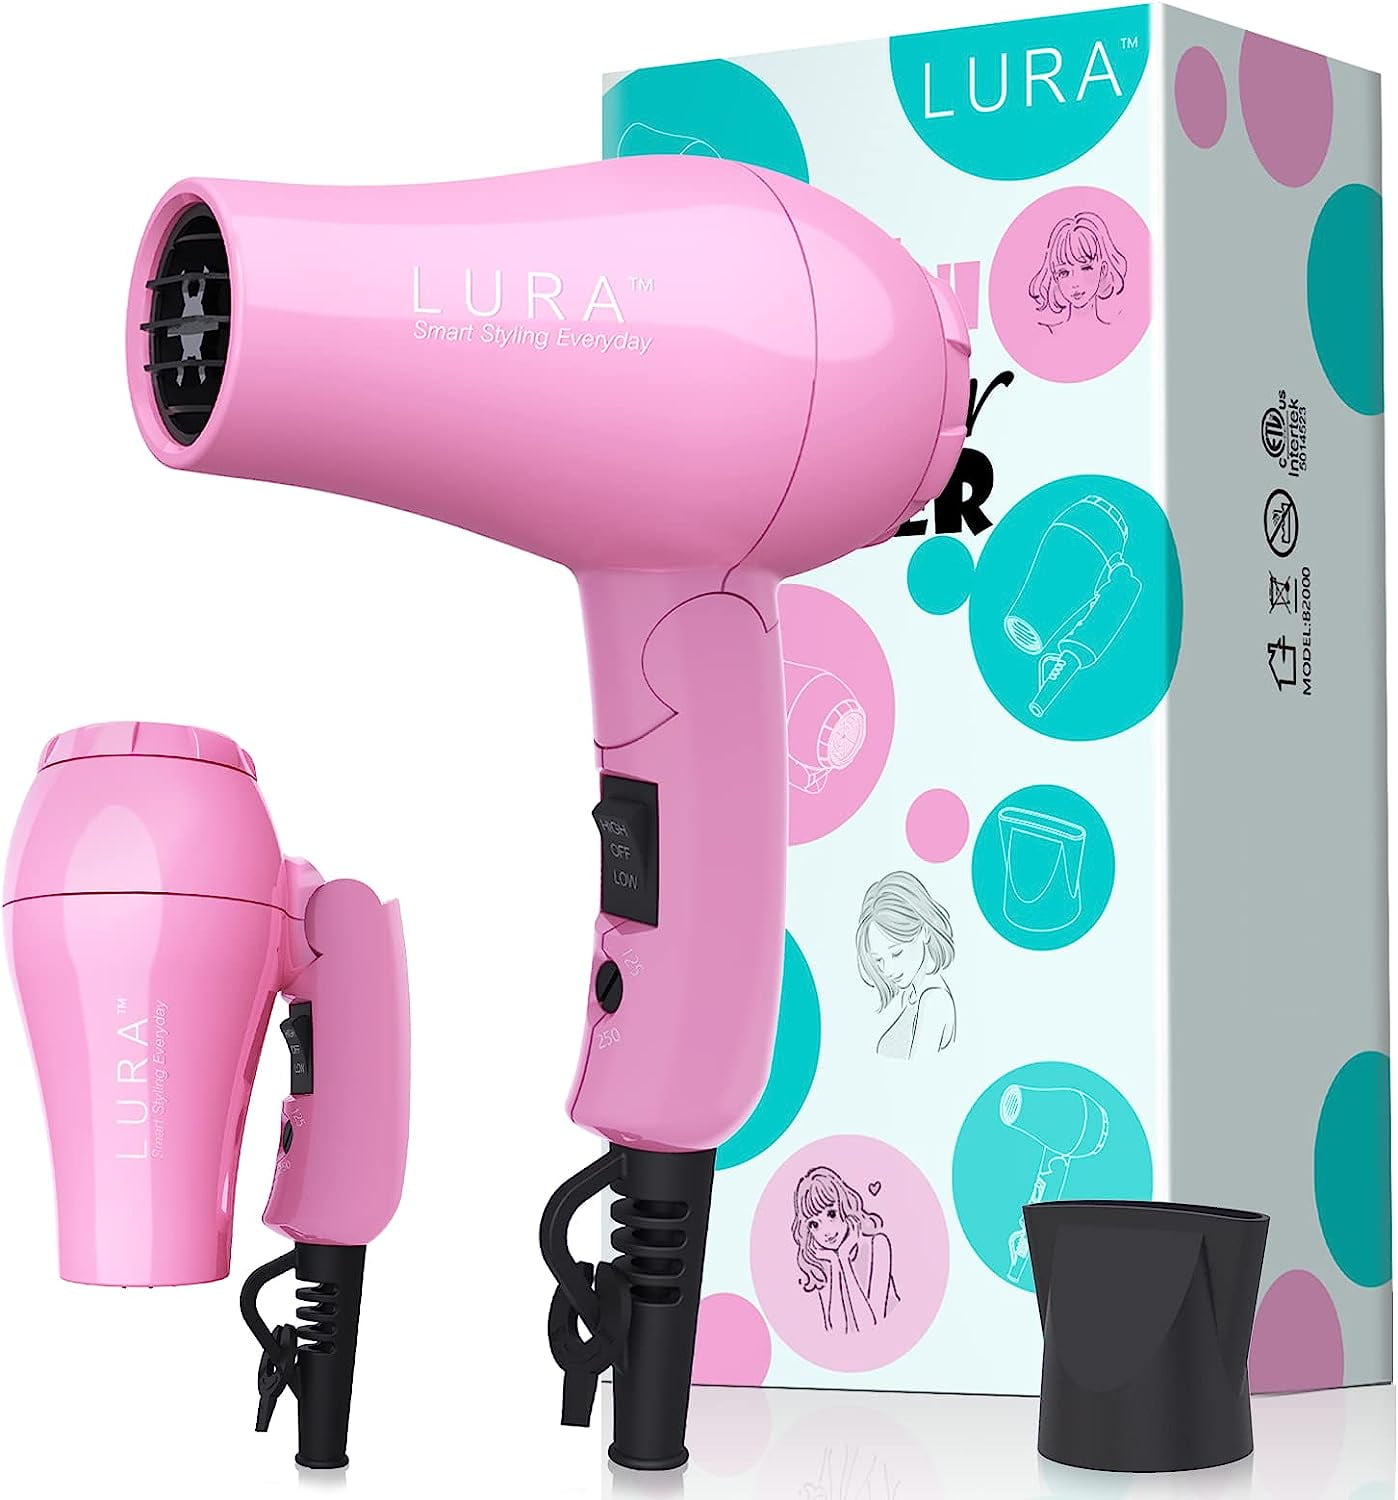 Lura Travel Portable Hair Dryer,Dual Voltage Mini Folding Handle Hair Blow Dryer Lightweight with 1 Concentrator,Pink - Walmart.com